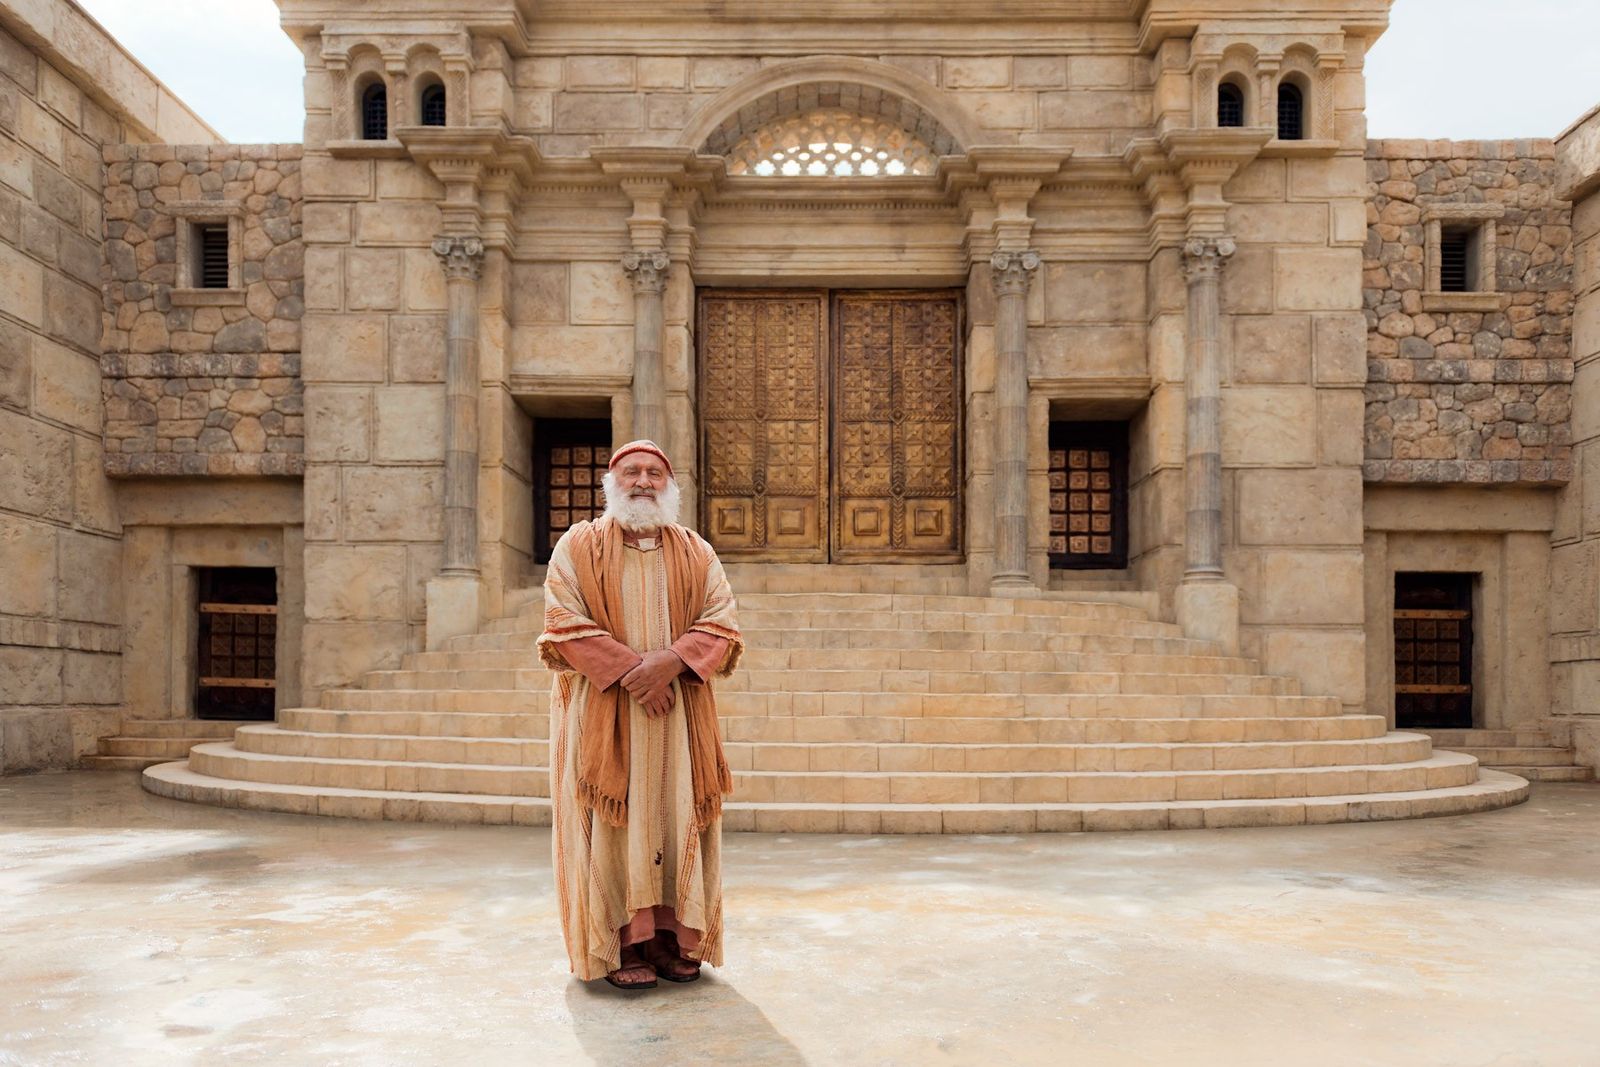 Simeon stands in the temple courtyard.